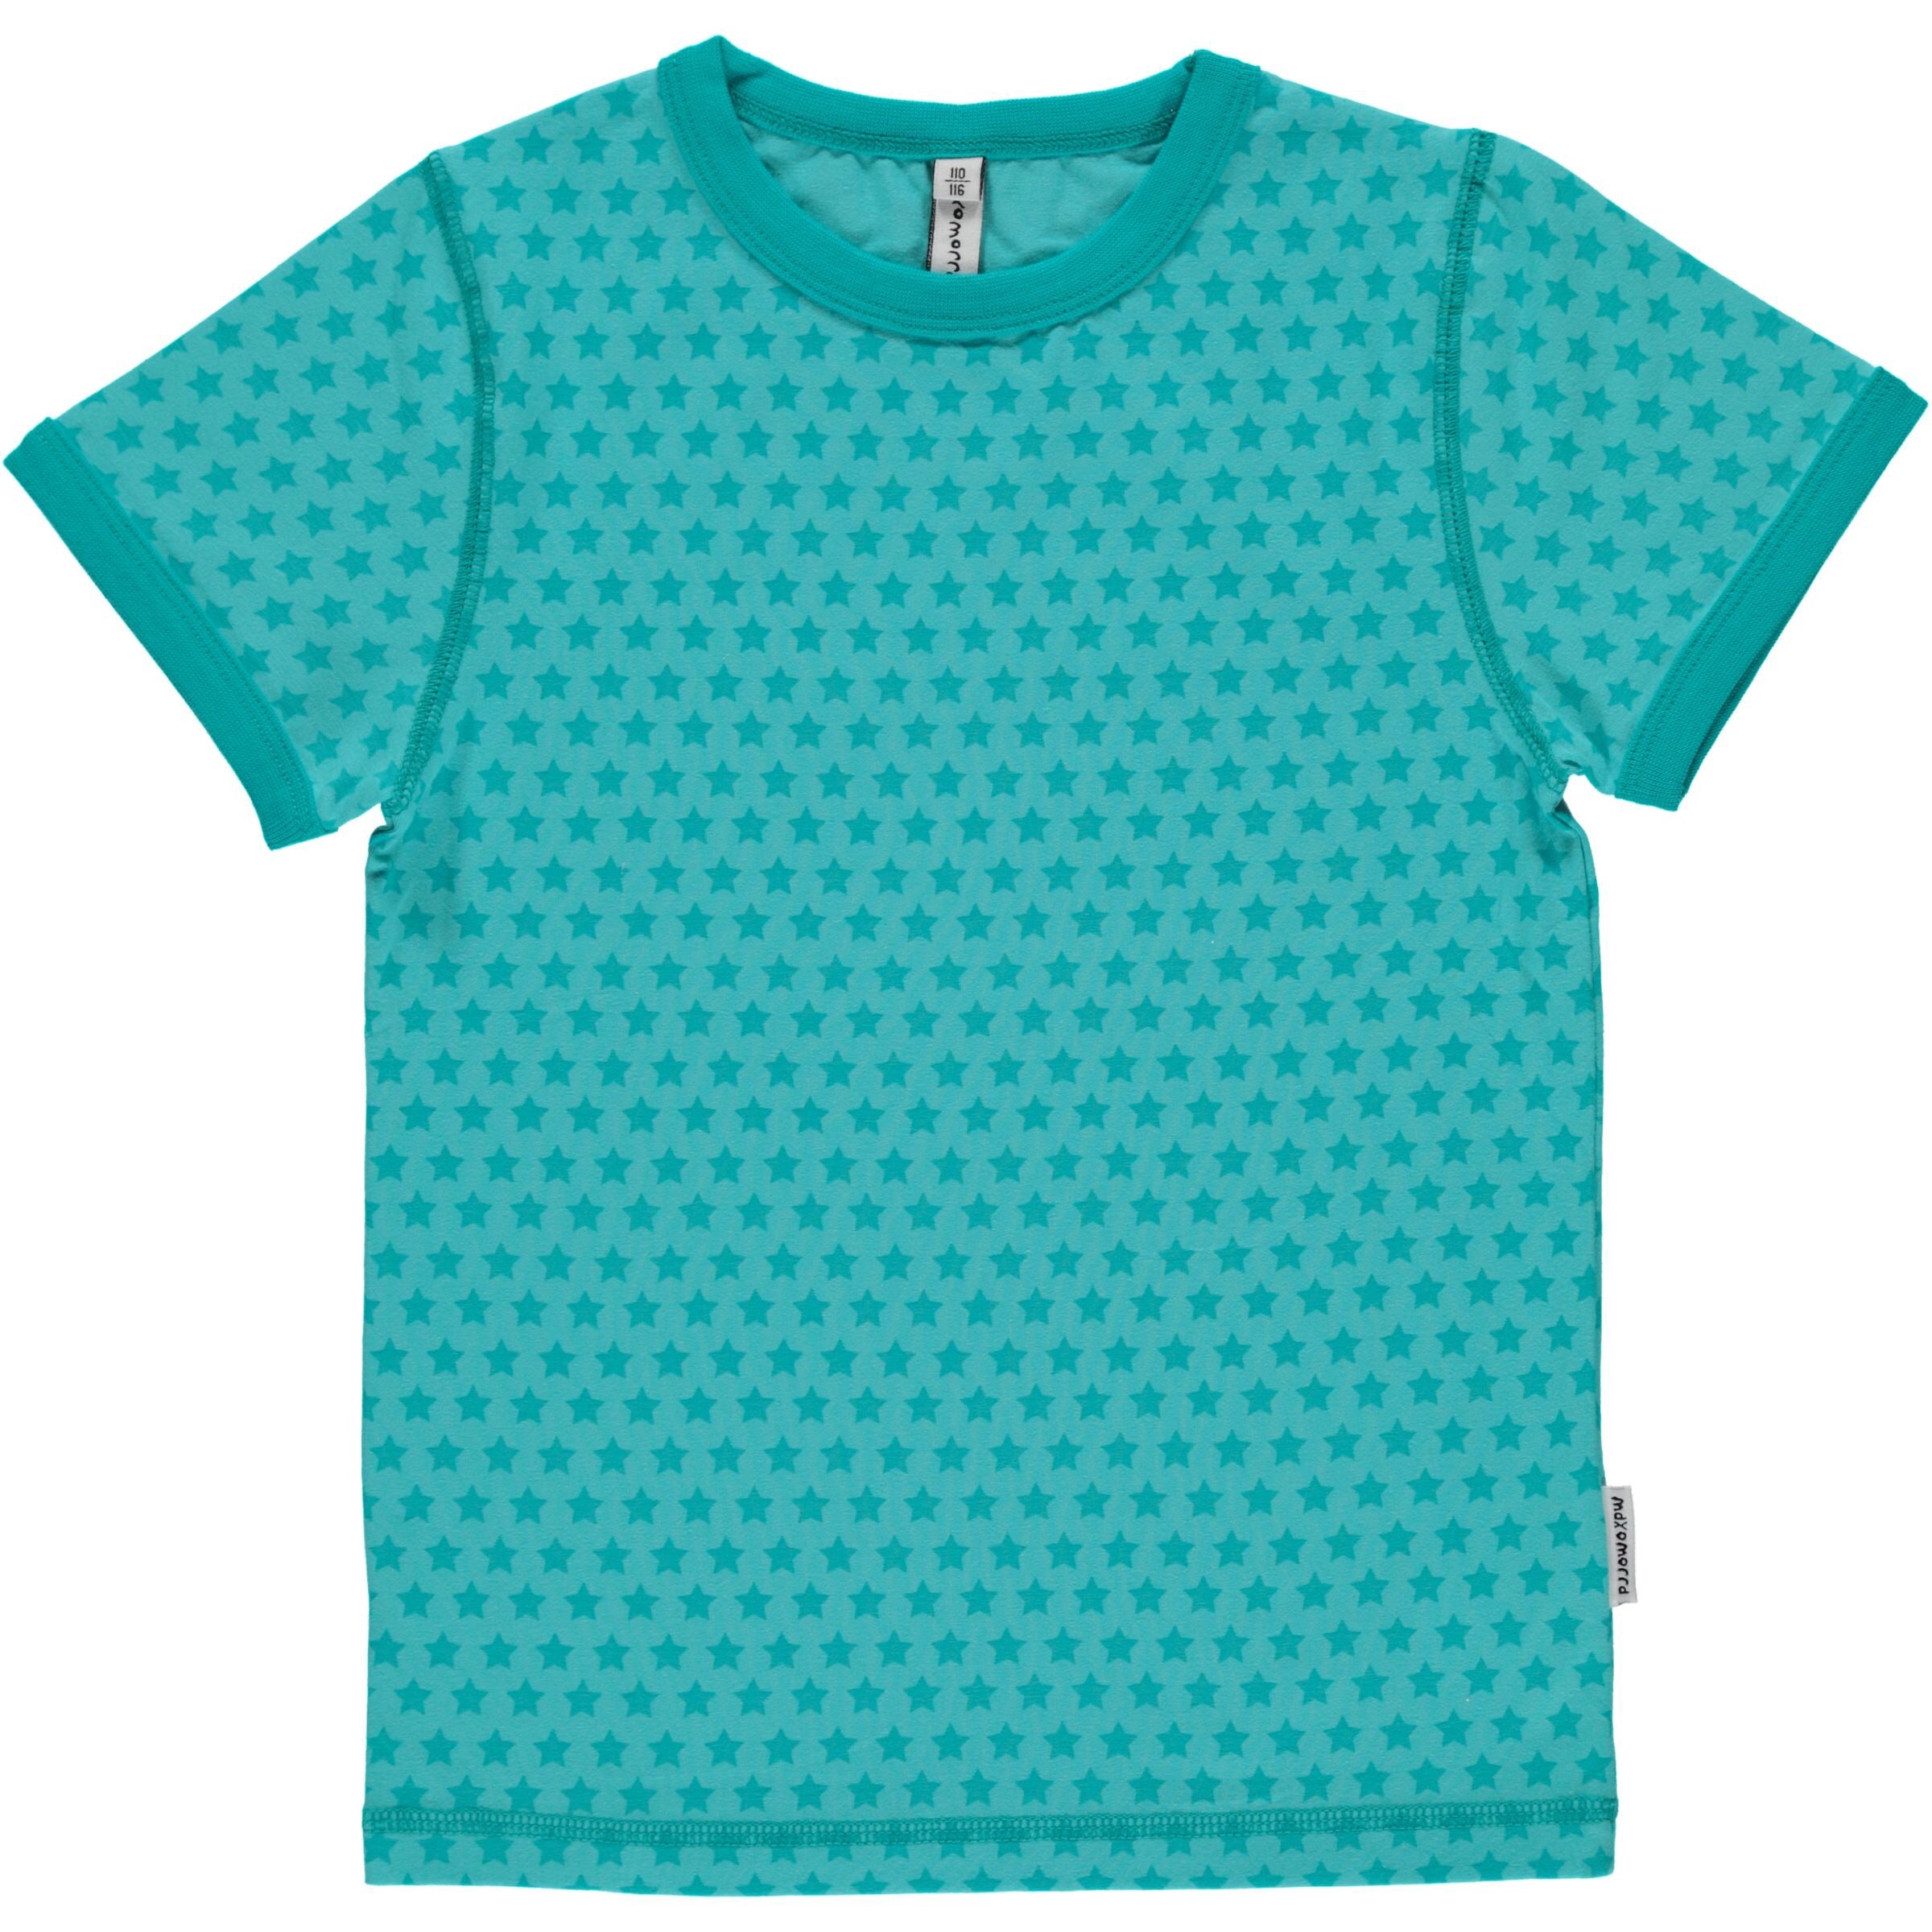 Maxomorra Top SS Mono Star Turquoise - little-tiger-togs